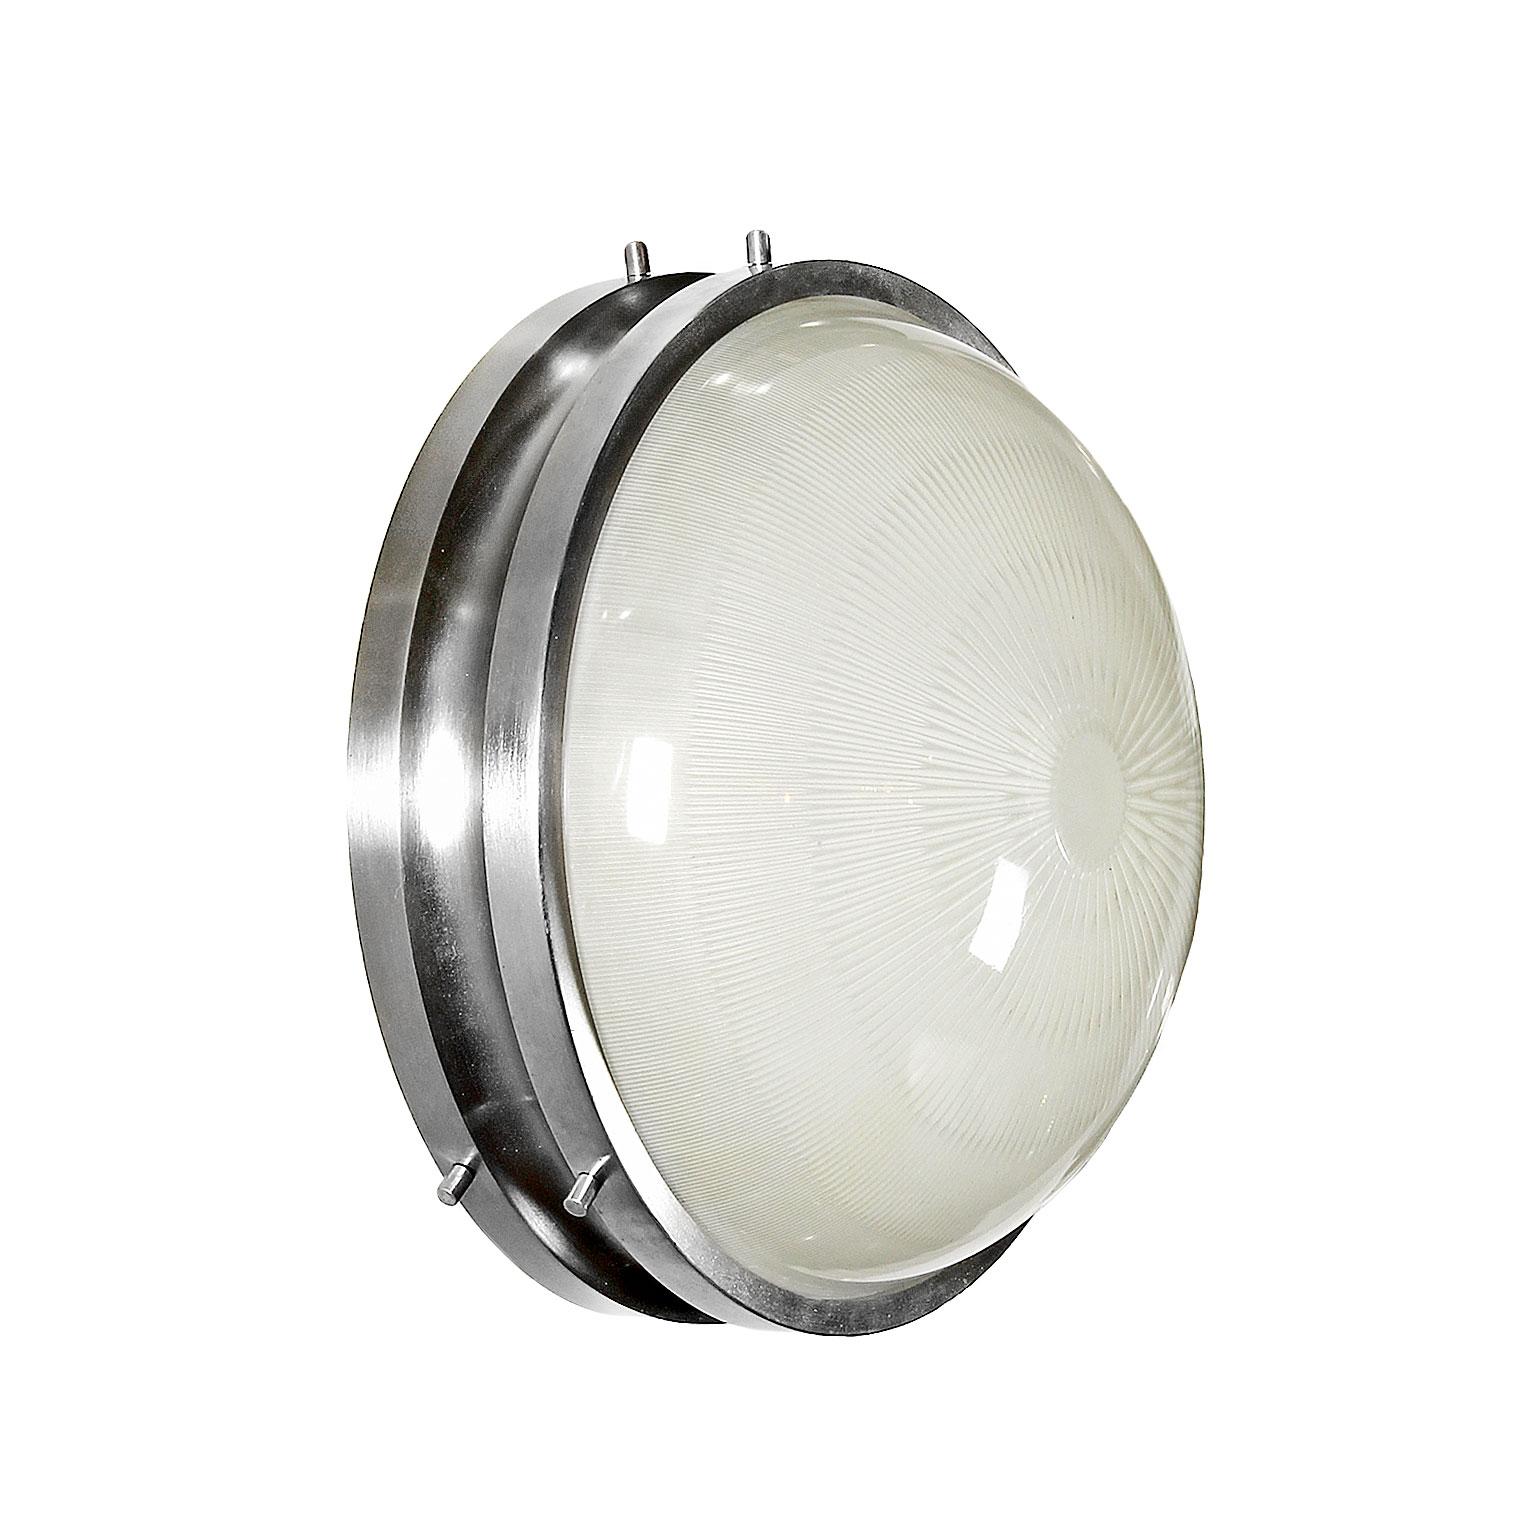 Ceiling or wall light 